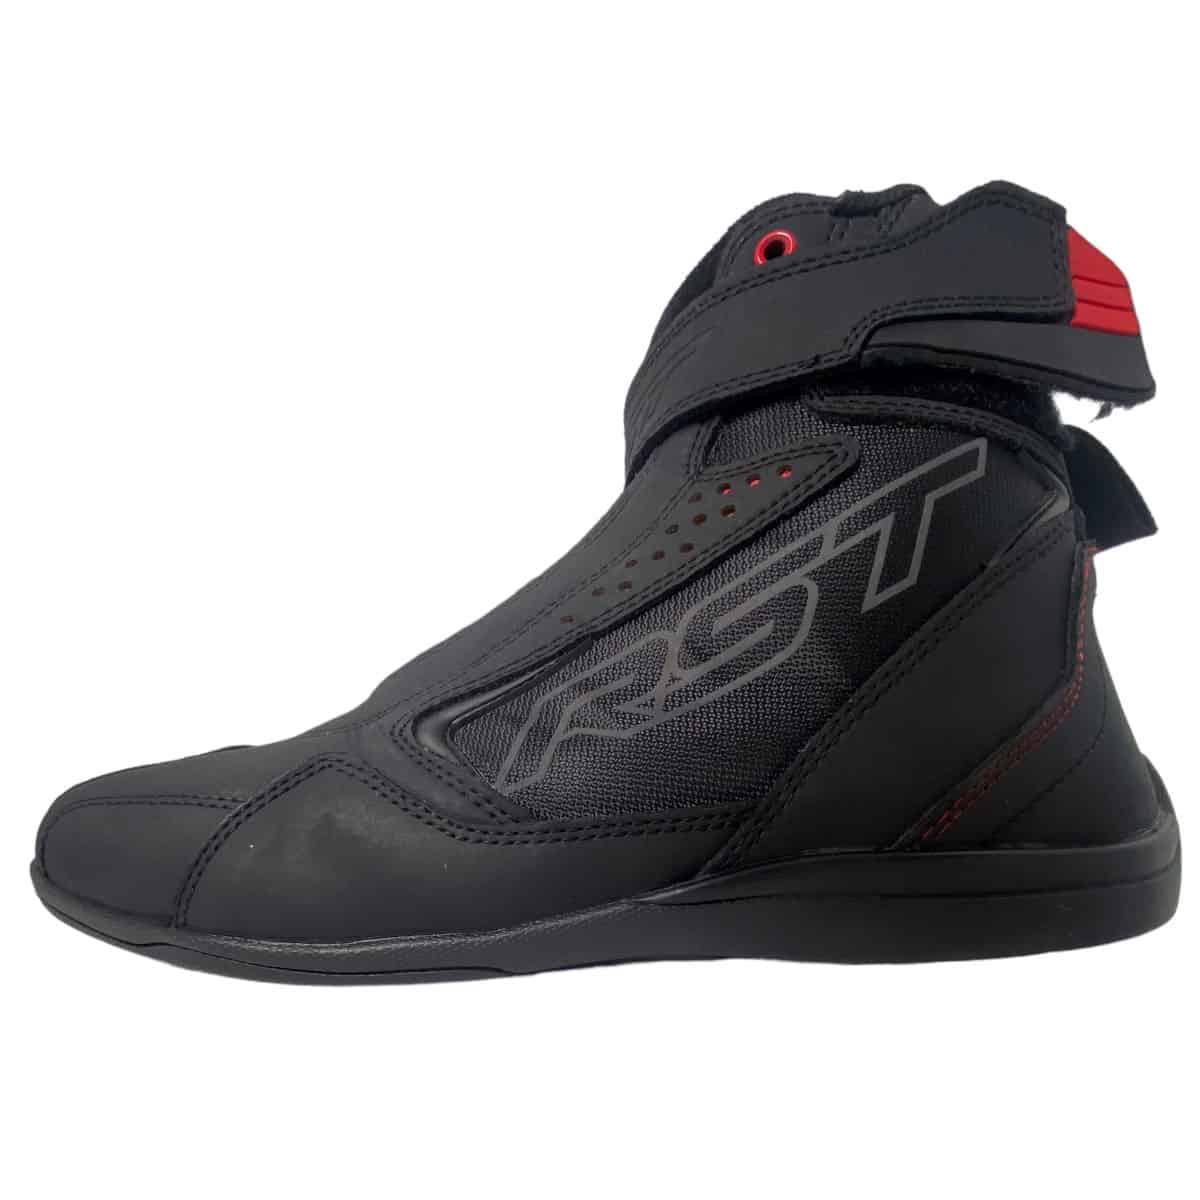 RST Frontier CE Boots: Breathable summer motorcycle boots - side view